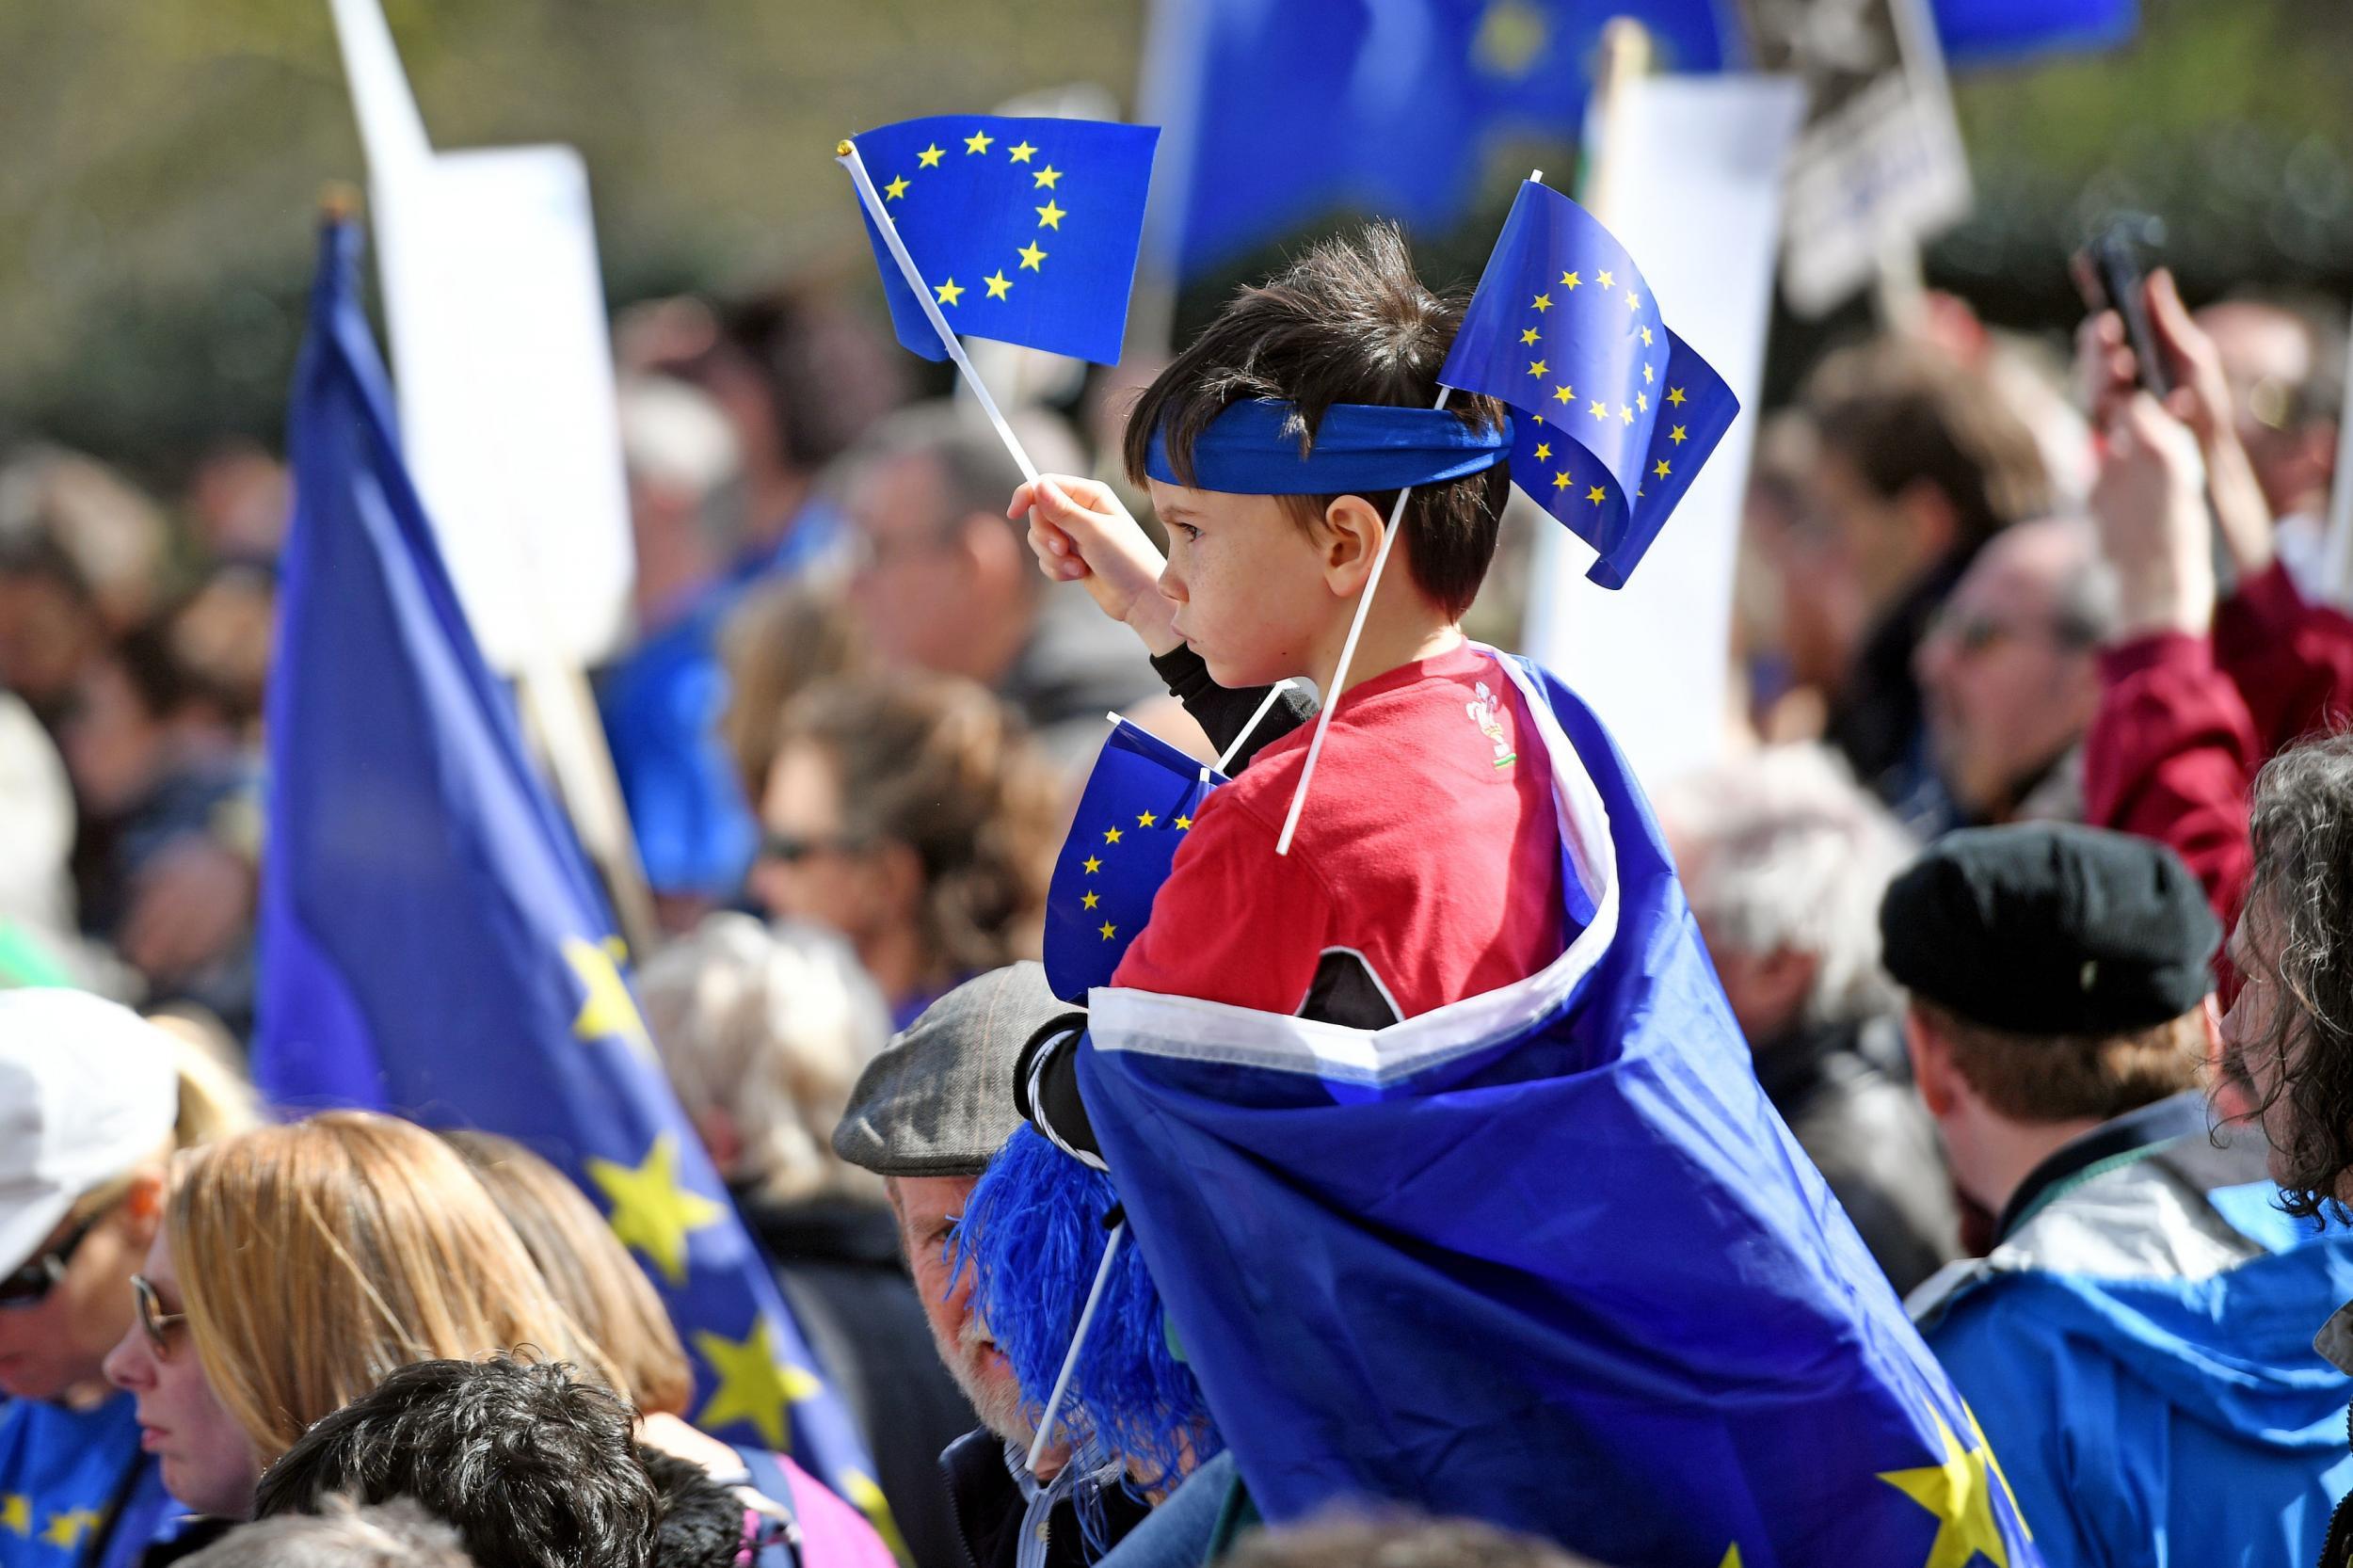 Pro-EU protesters taking part in a March for Europe rally against Brexit in central London.